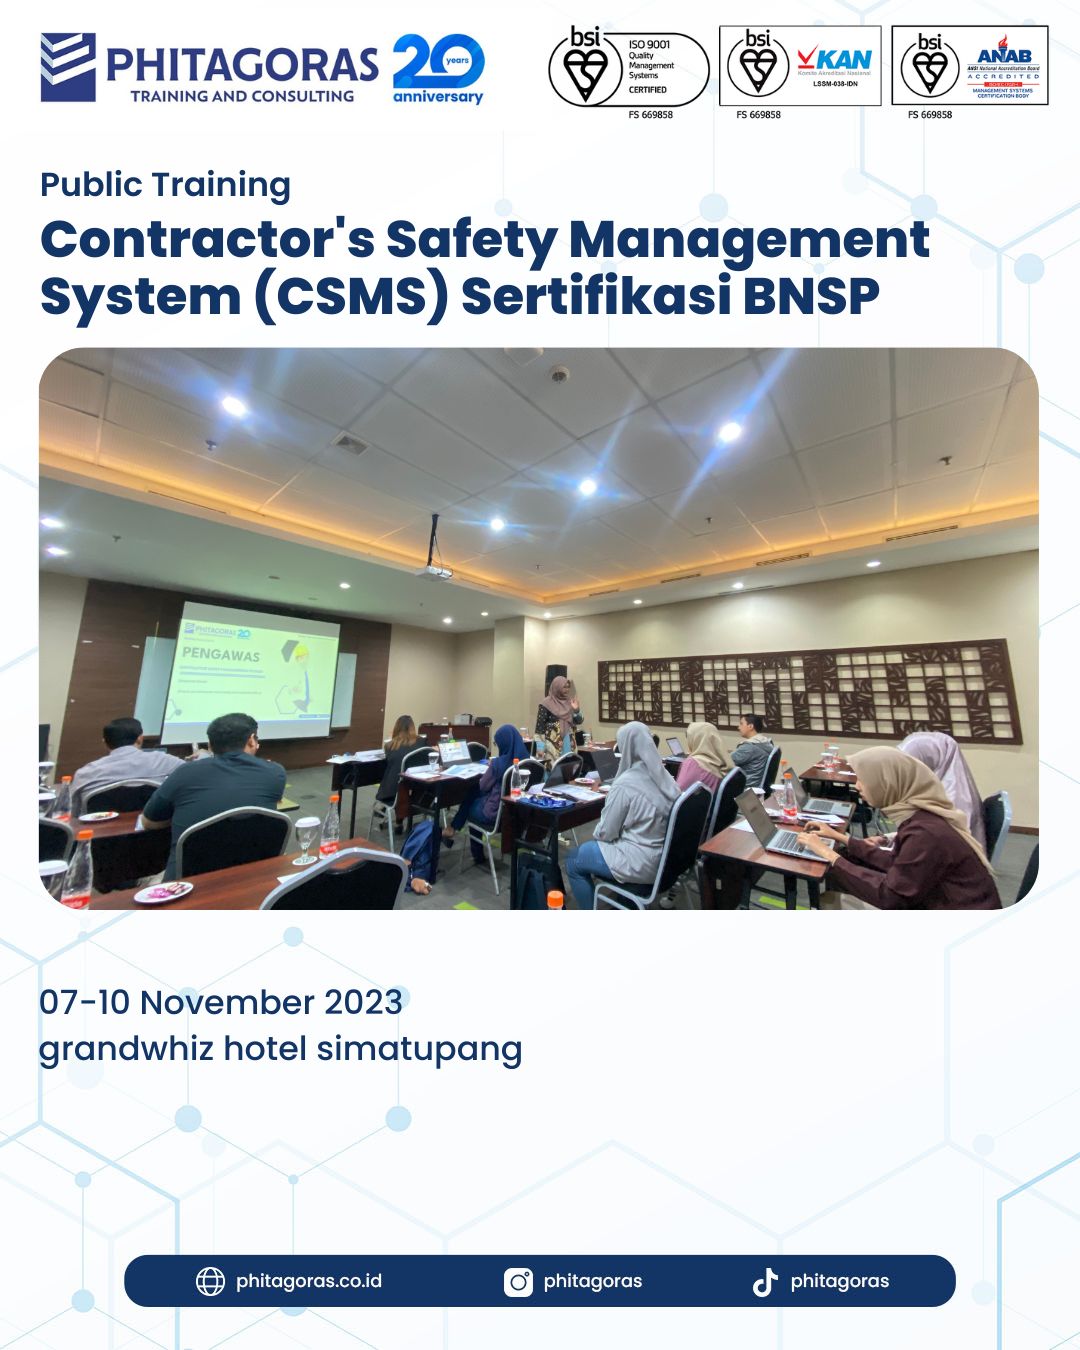 Public Training Contractor's Safety Management System (CSMS) Sertifikasi BNSP